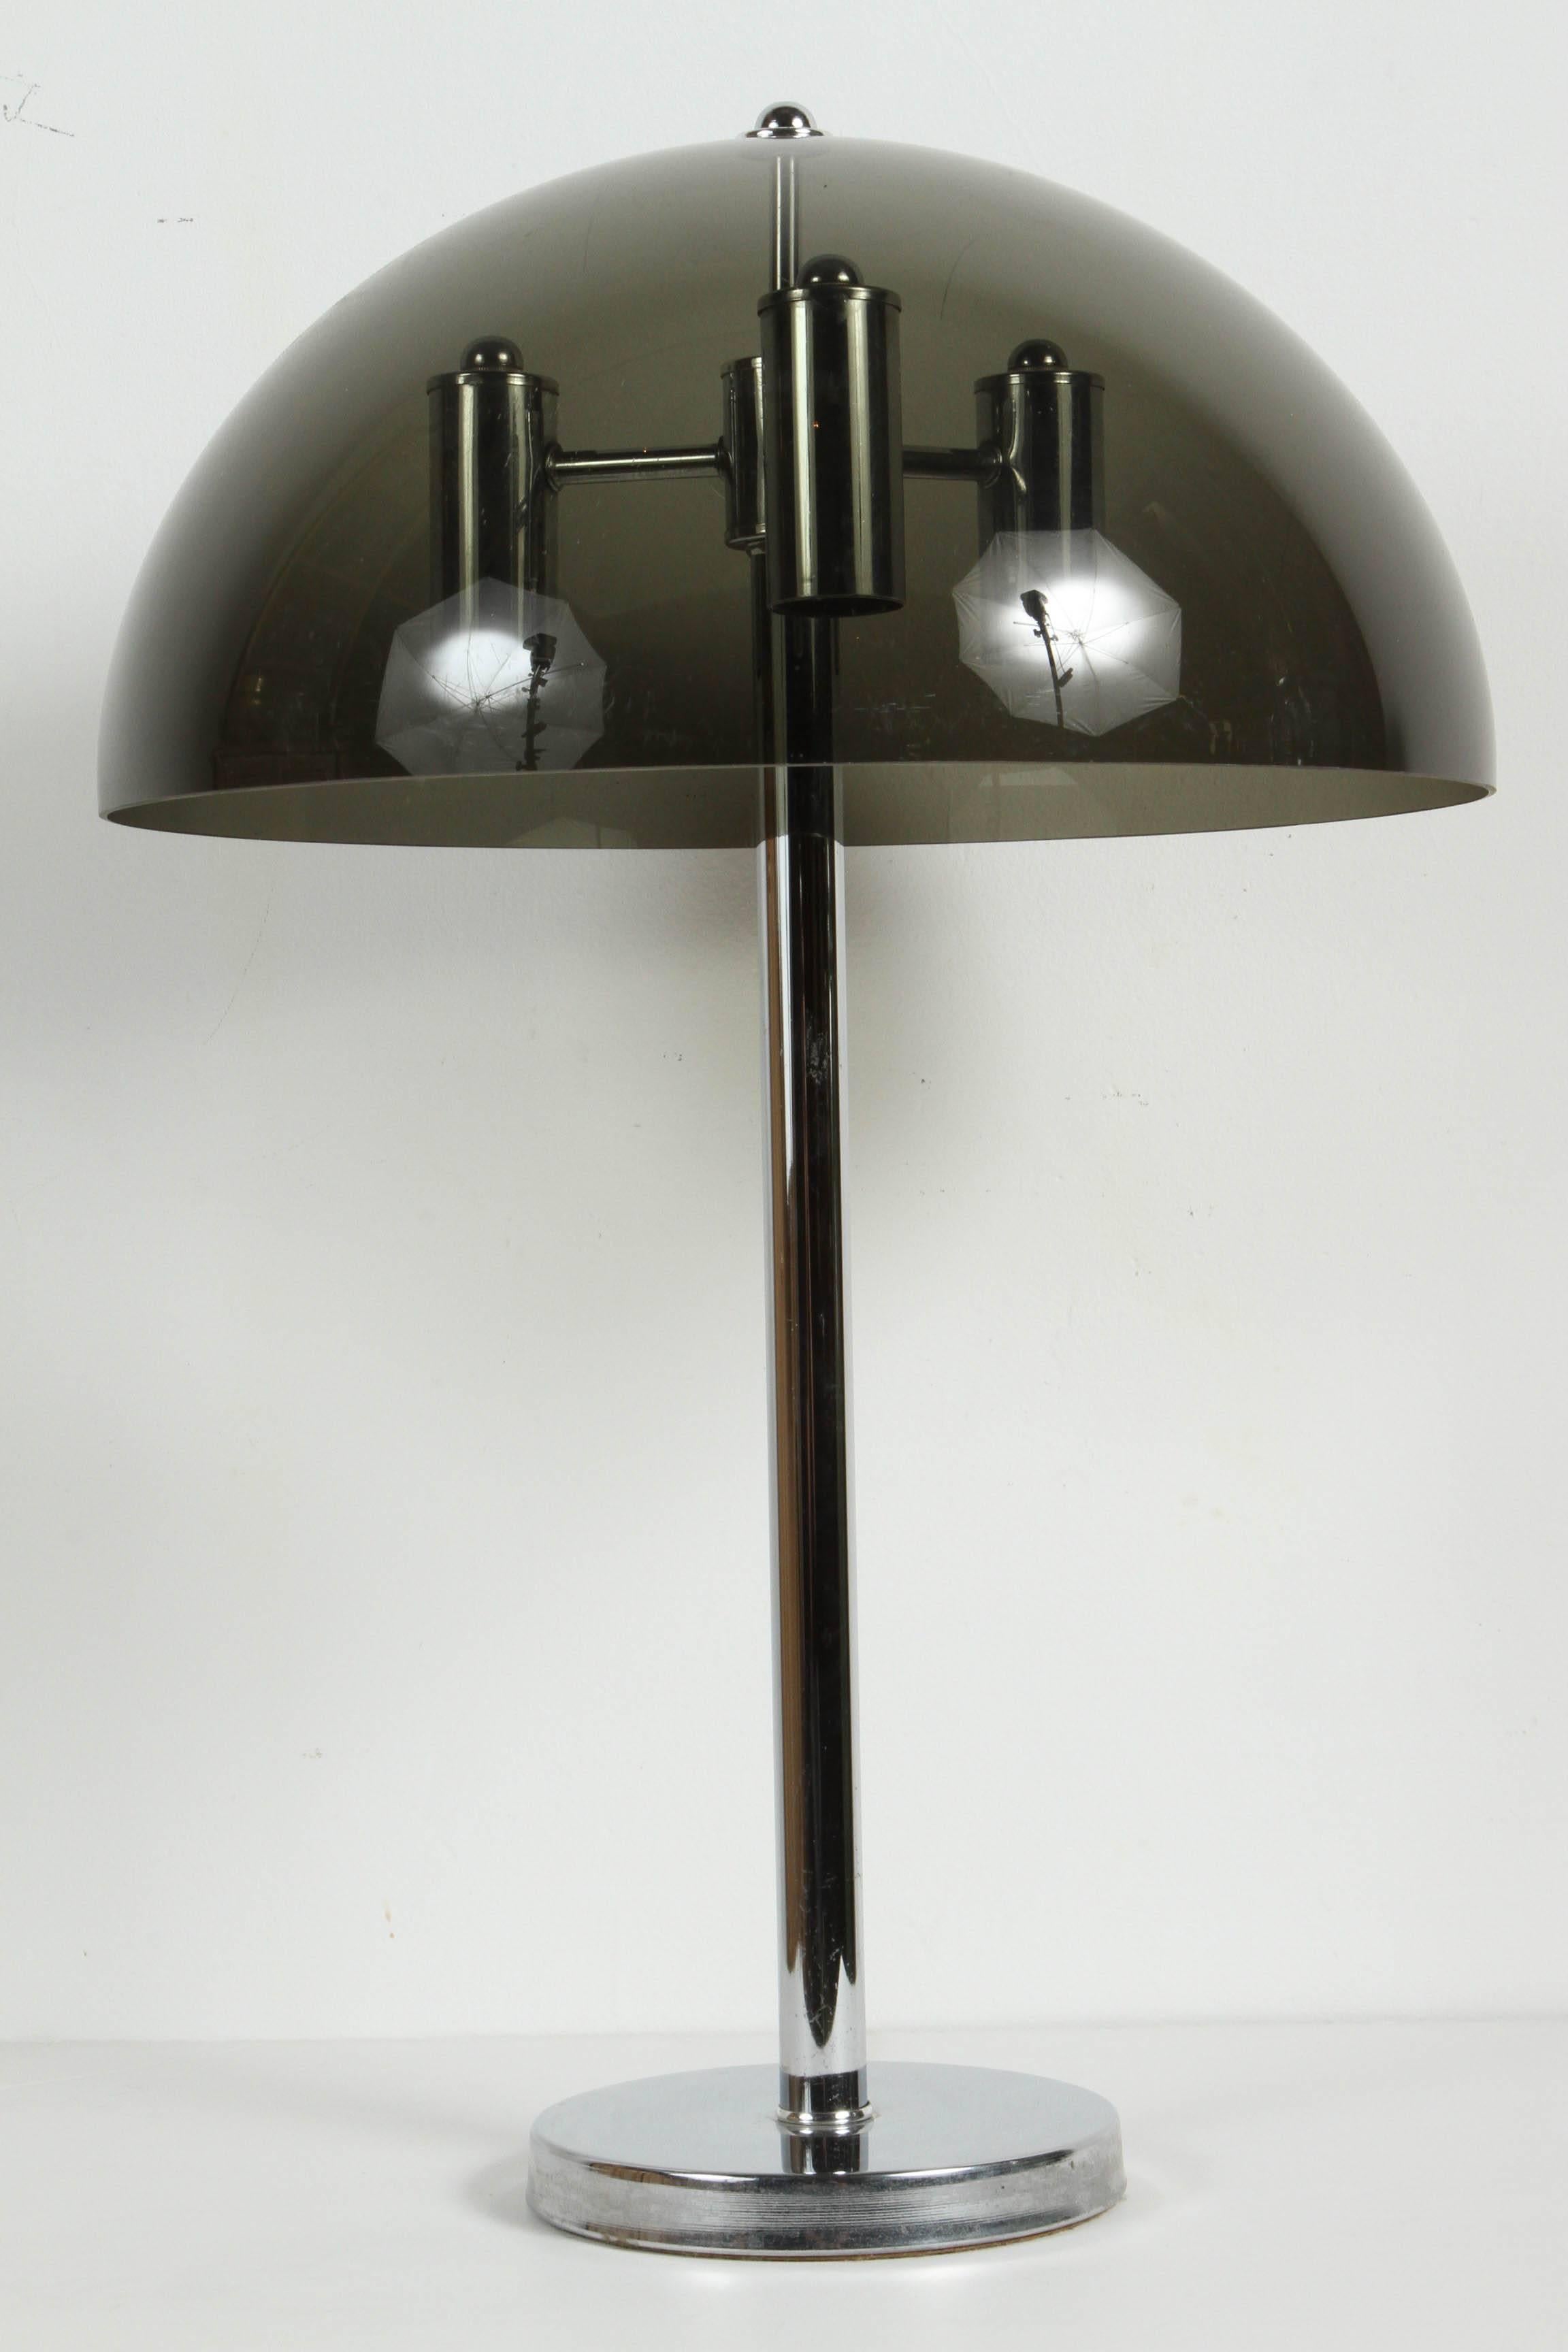 Smoked Lucite dome shade desk lamp mounted on a thin chrome column, with a circular base.
Mushroom, Sputnik style table desk lamp, circa 1970.
Measures: Overall height 24 in, diameter of shade 16 in, height of shade 8 in.
Base measures 7 in